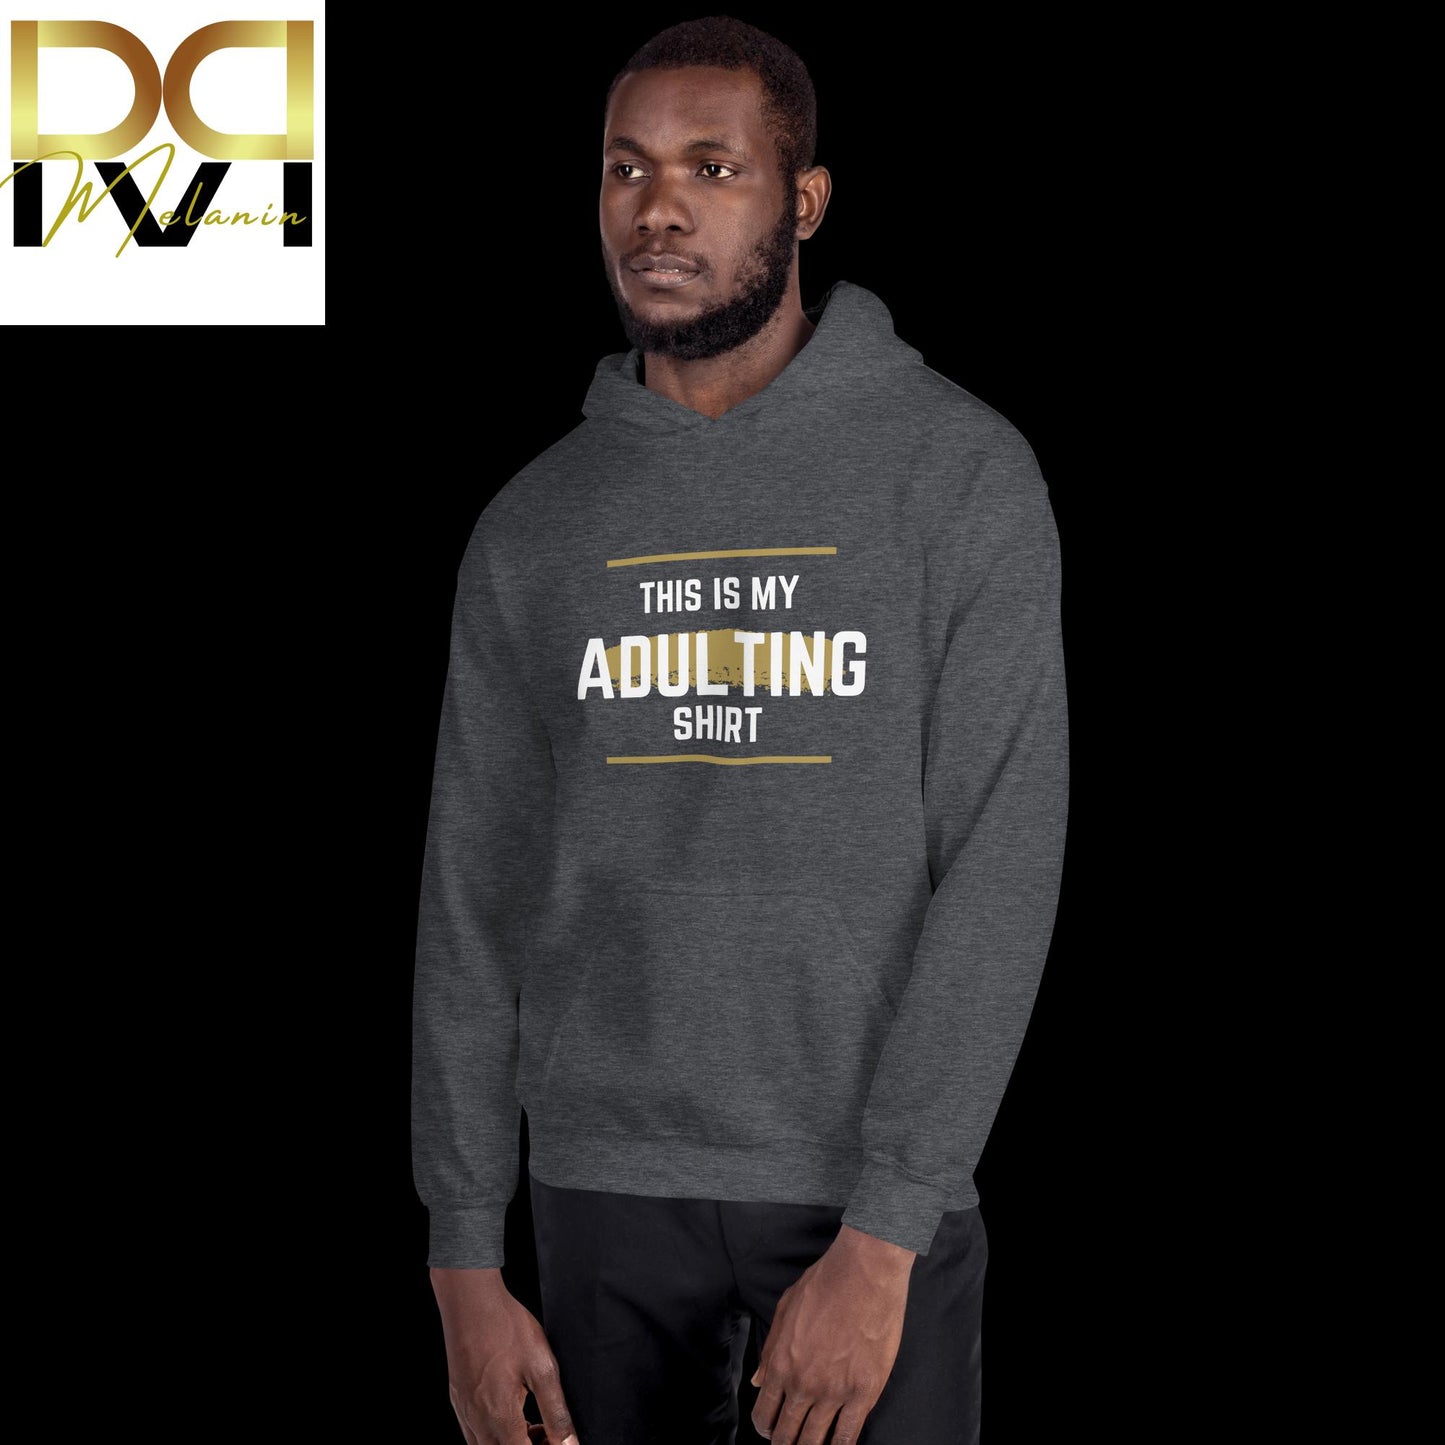 "This is My Adulting Shirt" Hoodie - Embrace Adulting with Style